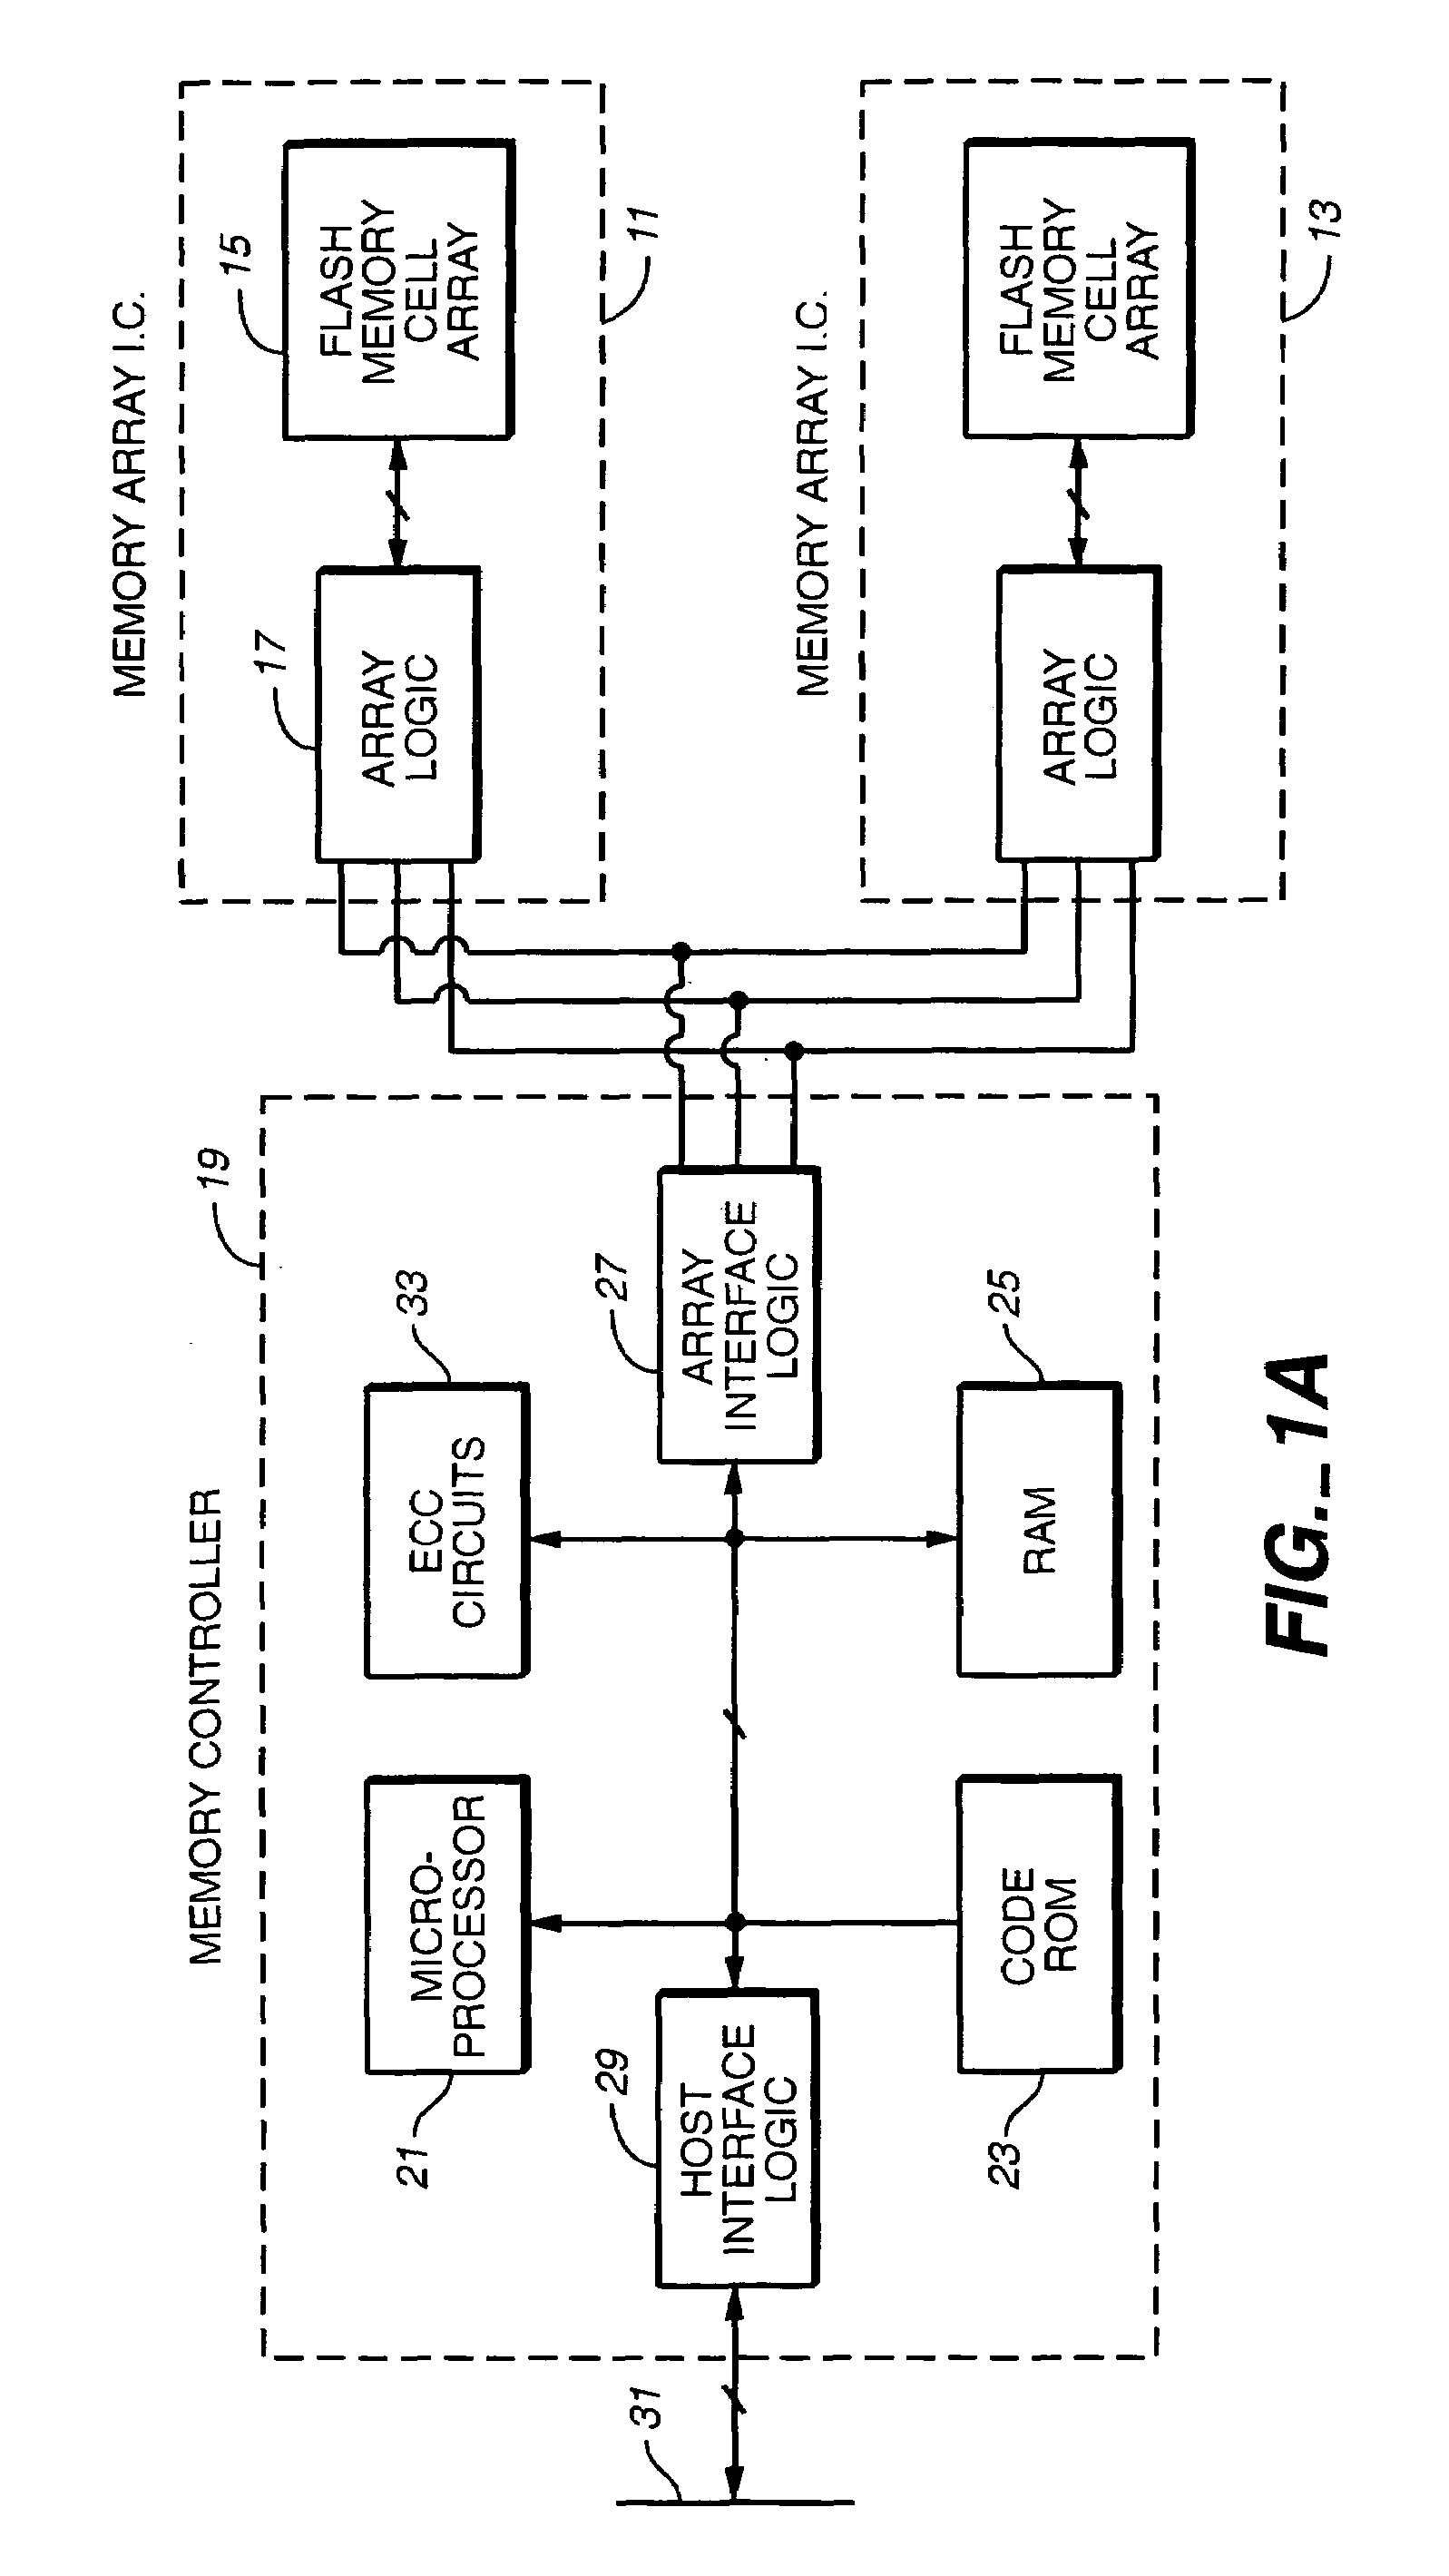 Non-volatile memory and method with improved indexing for scratch pad and update blocks